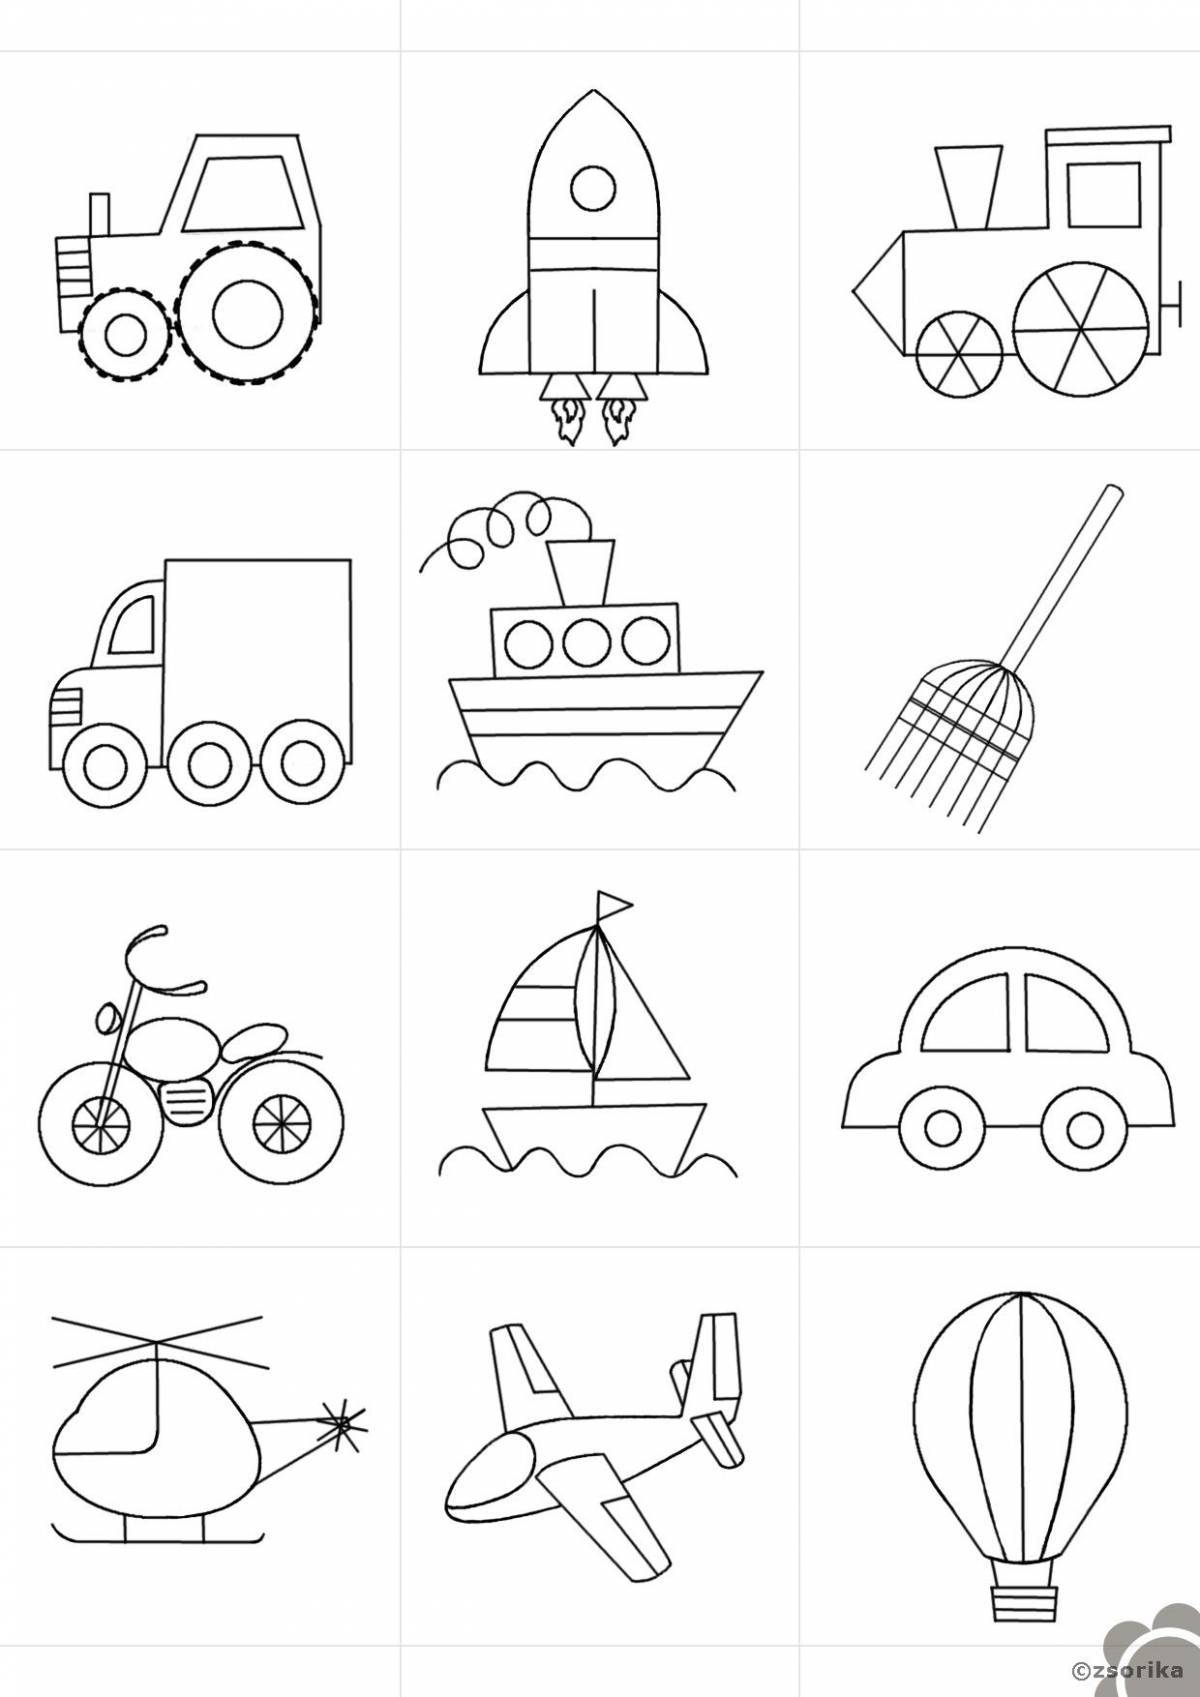 Playful transport coloring book for kids 6-7 years old